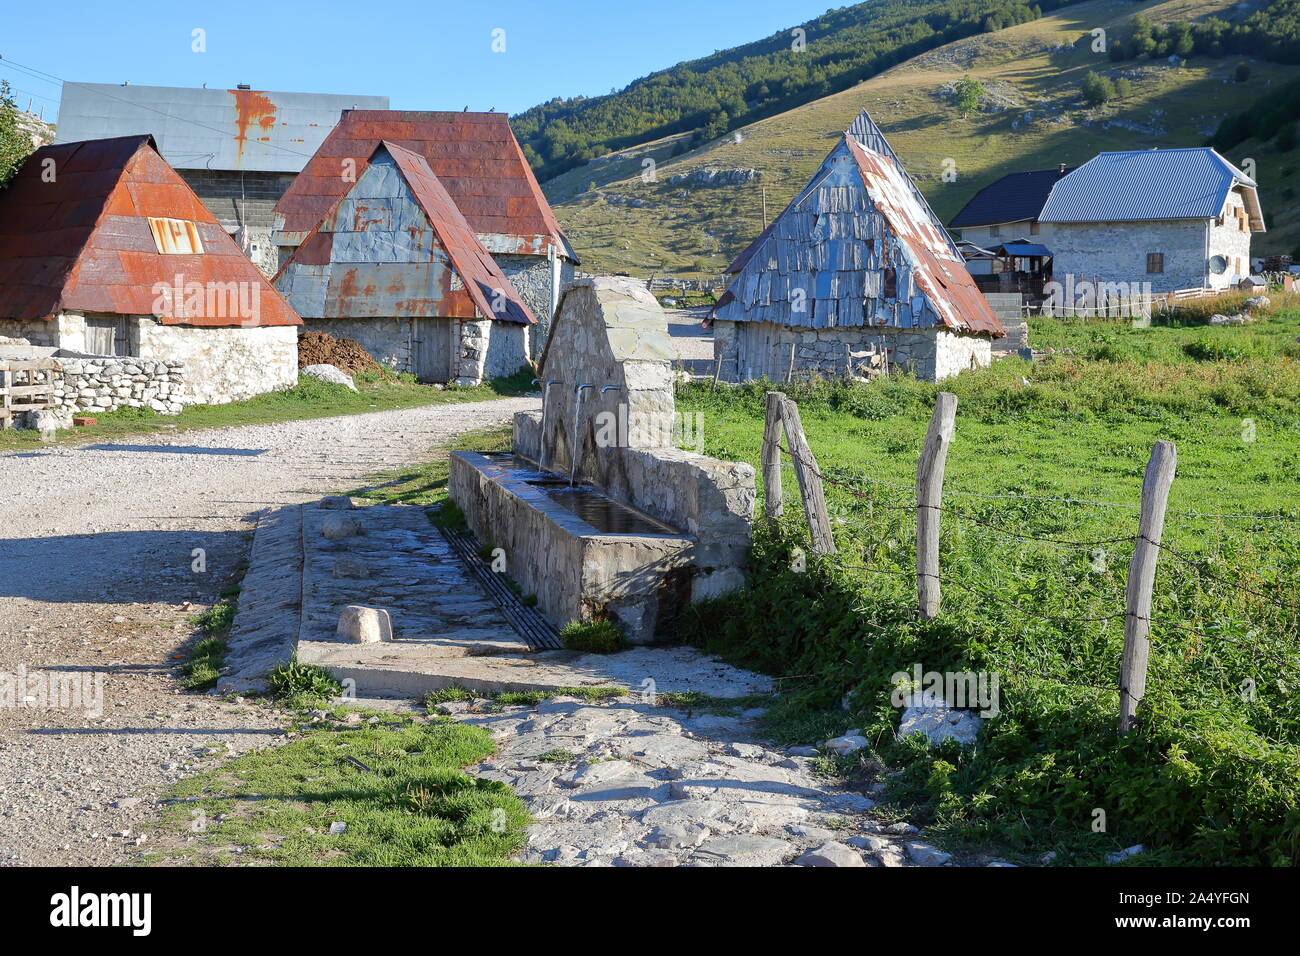 Traditional houses in Lukomir village, with a fountain in the foreground, Bosnia and Herzegovina Stock Photo